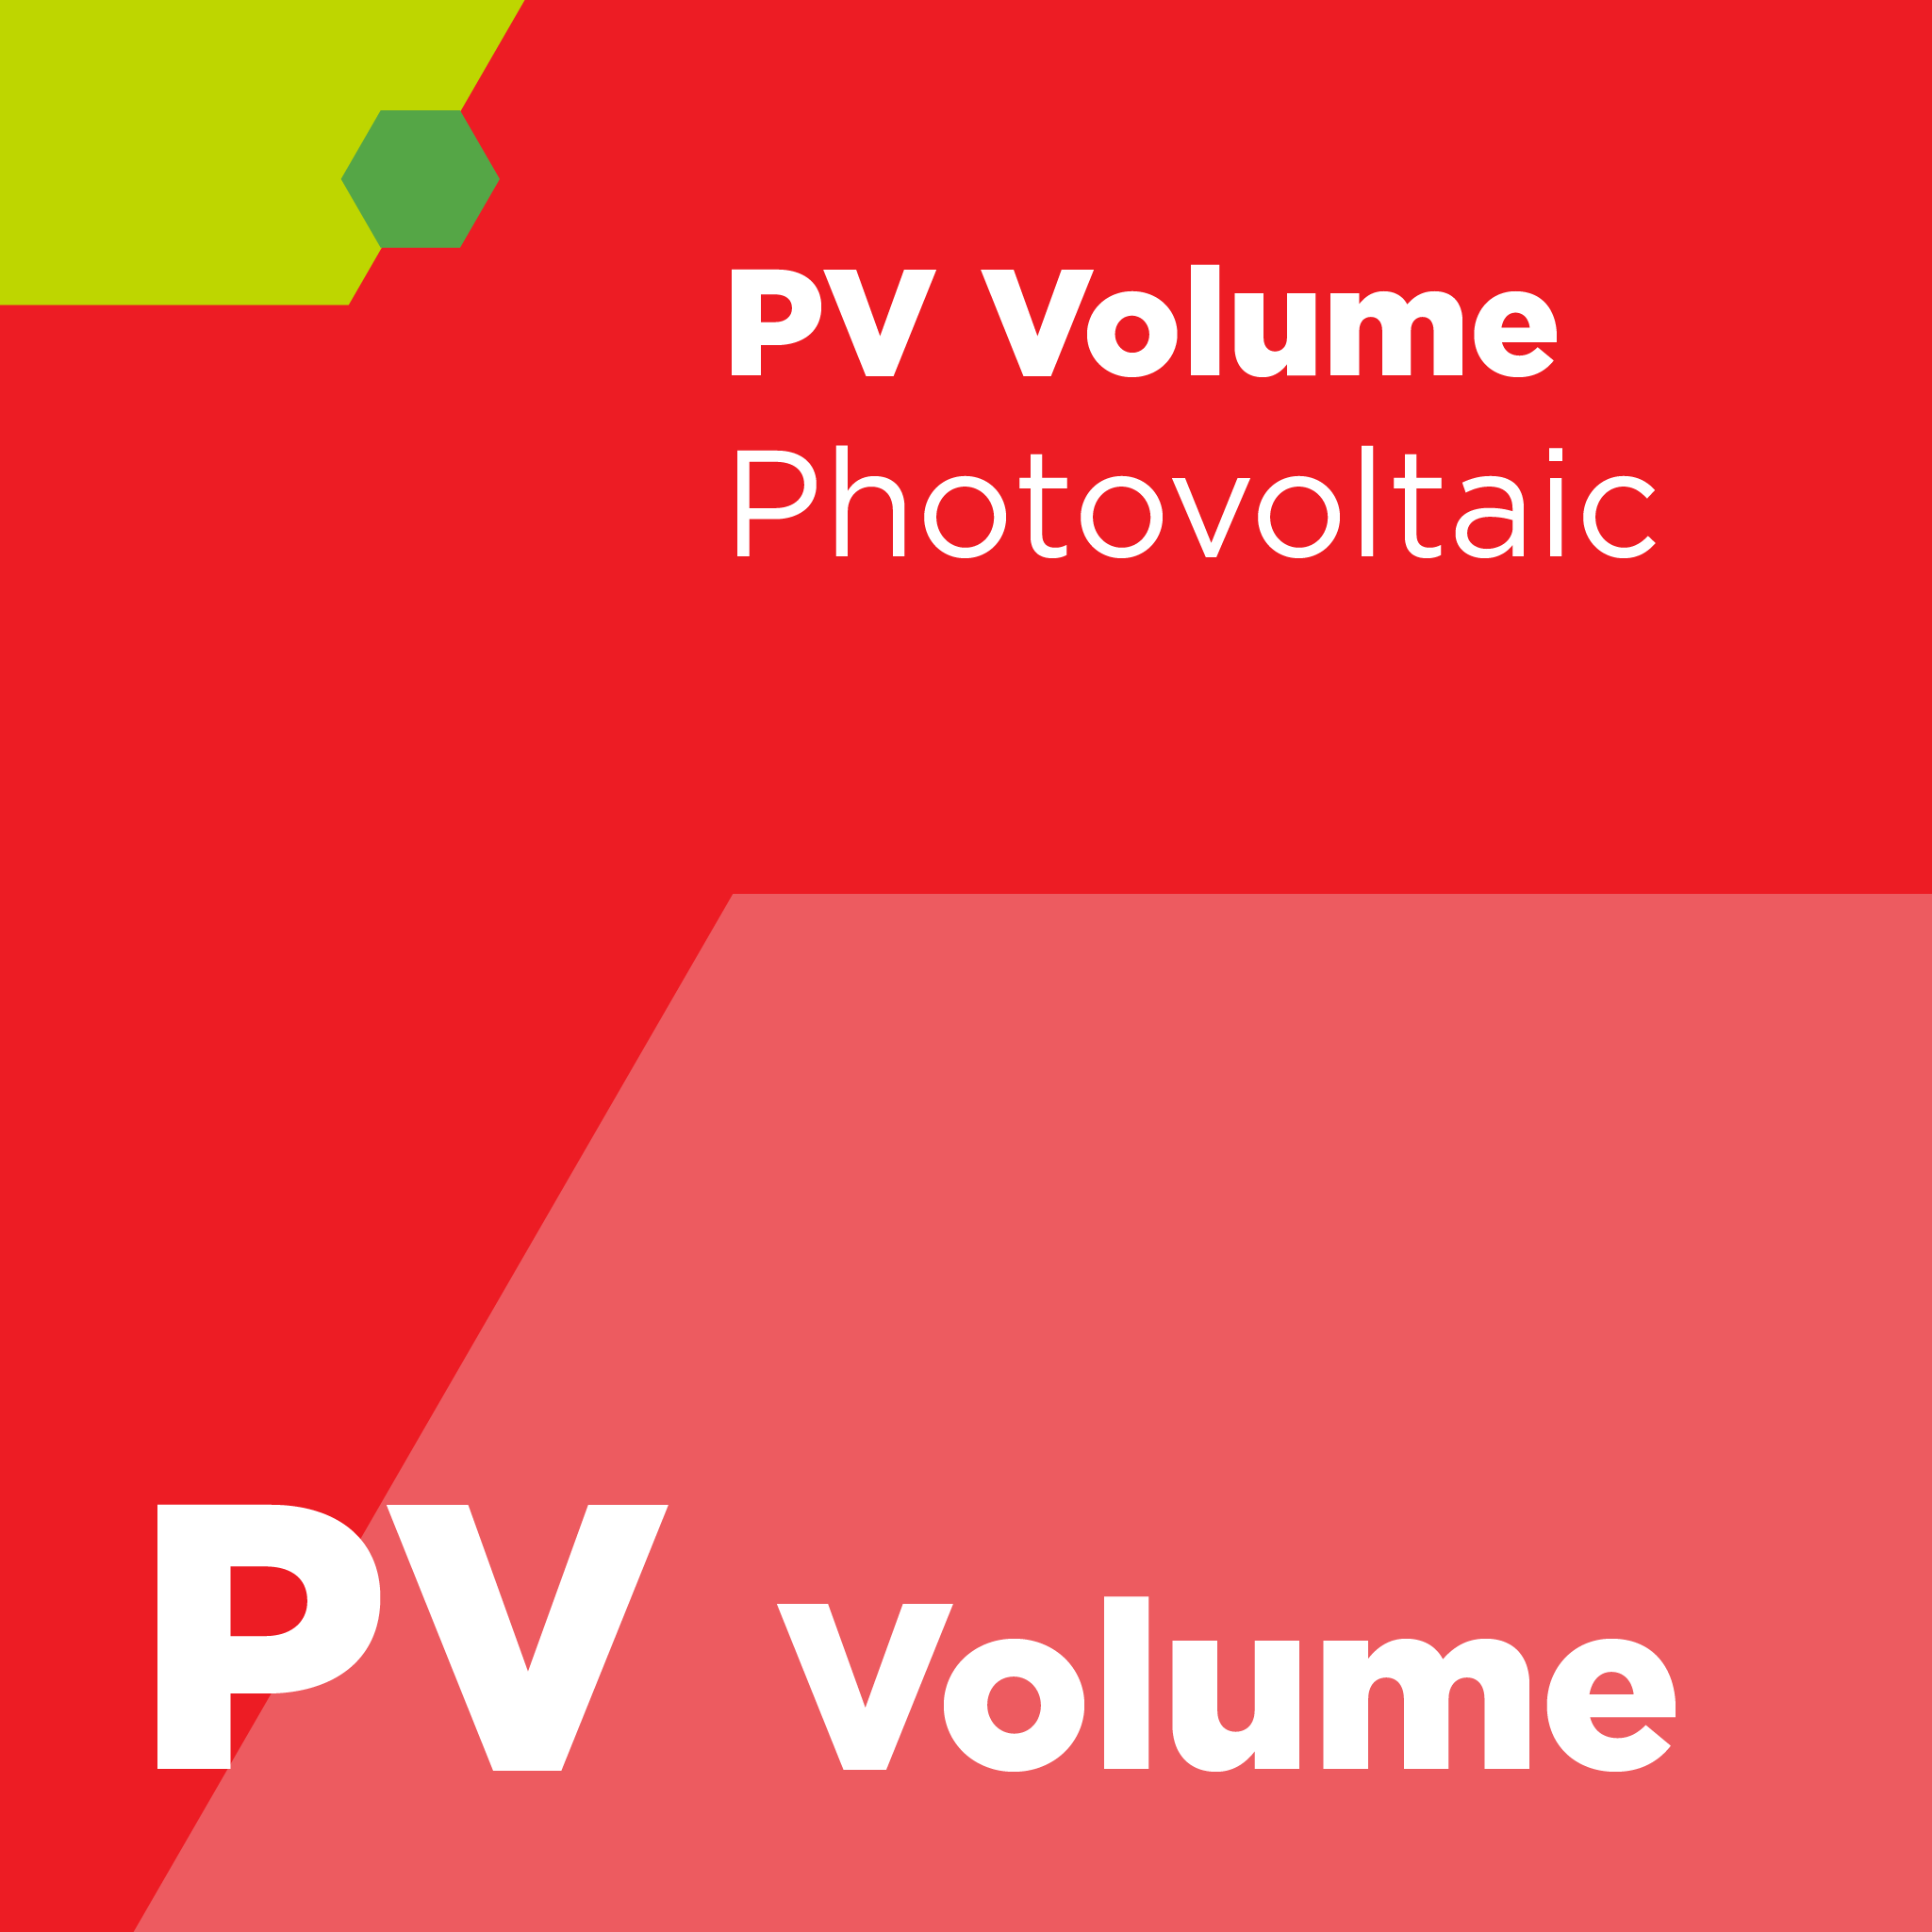 PV09800 - SEMI PV99 - Classification of Building Integrated Photovoltaic (BIPV)